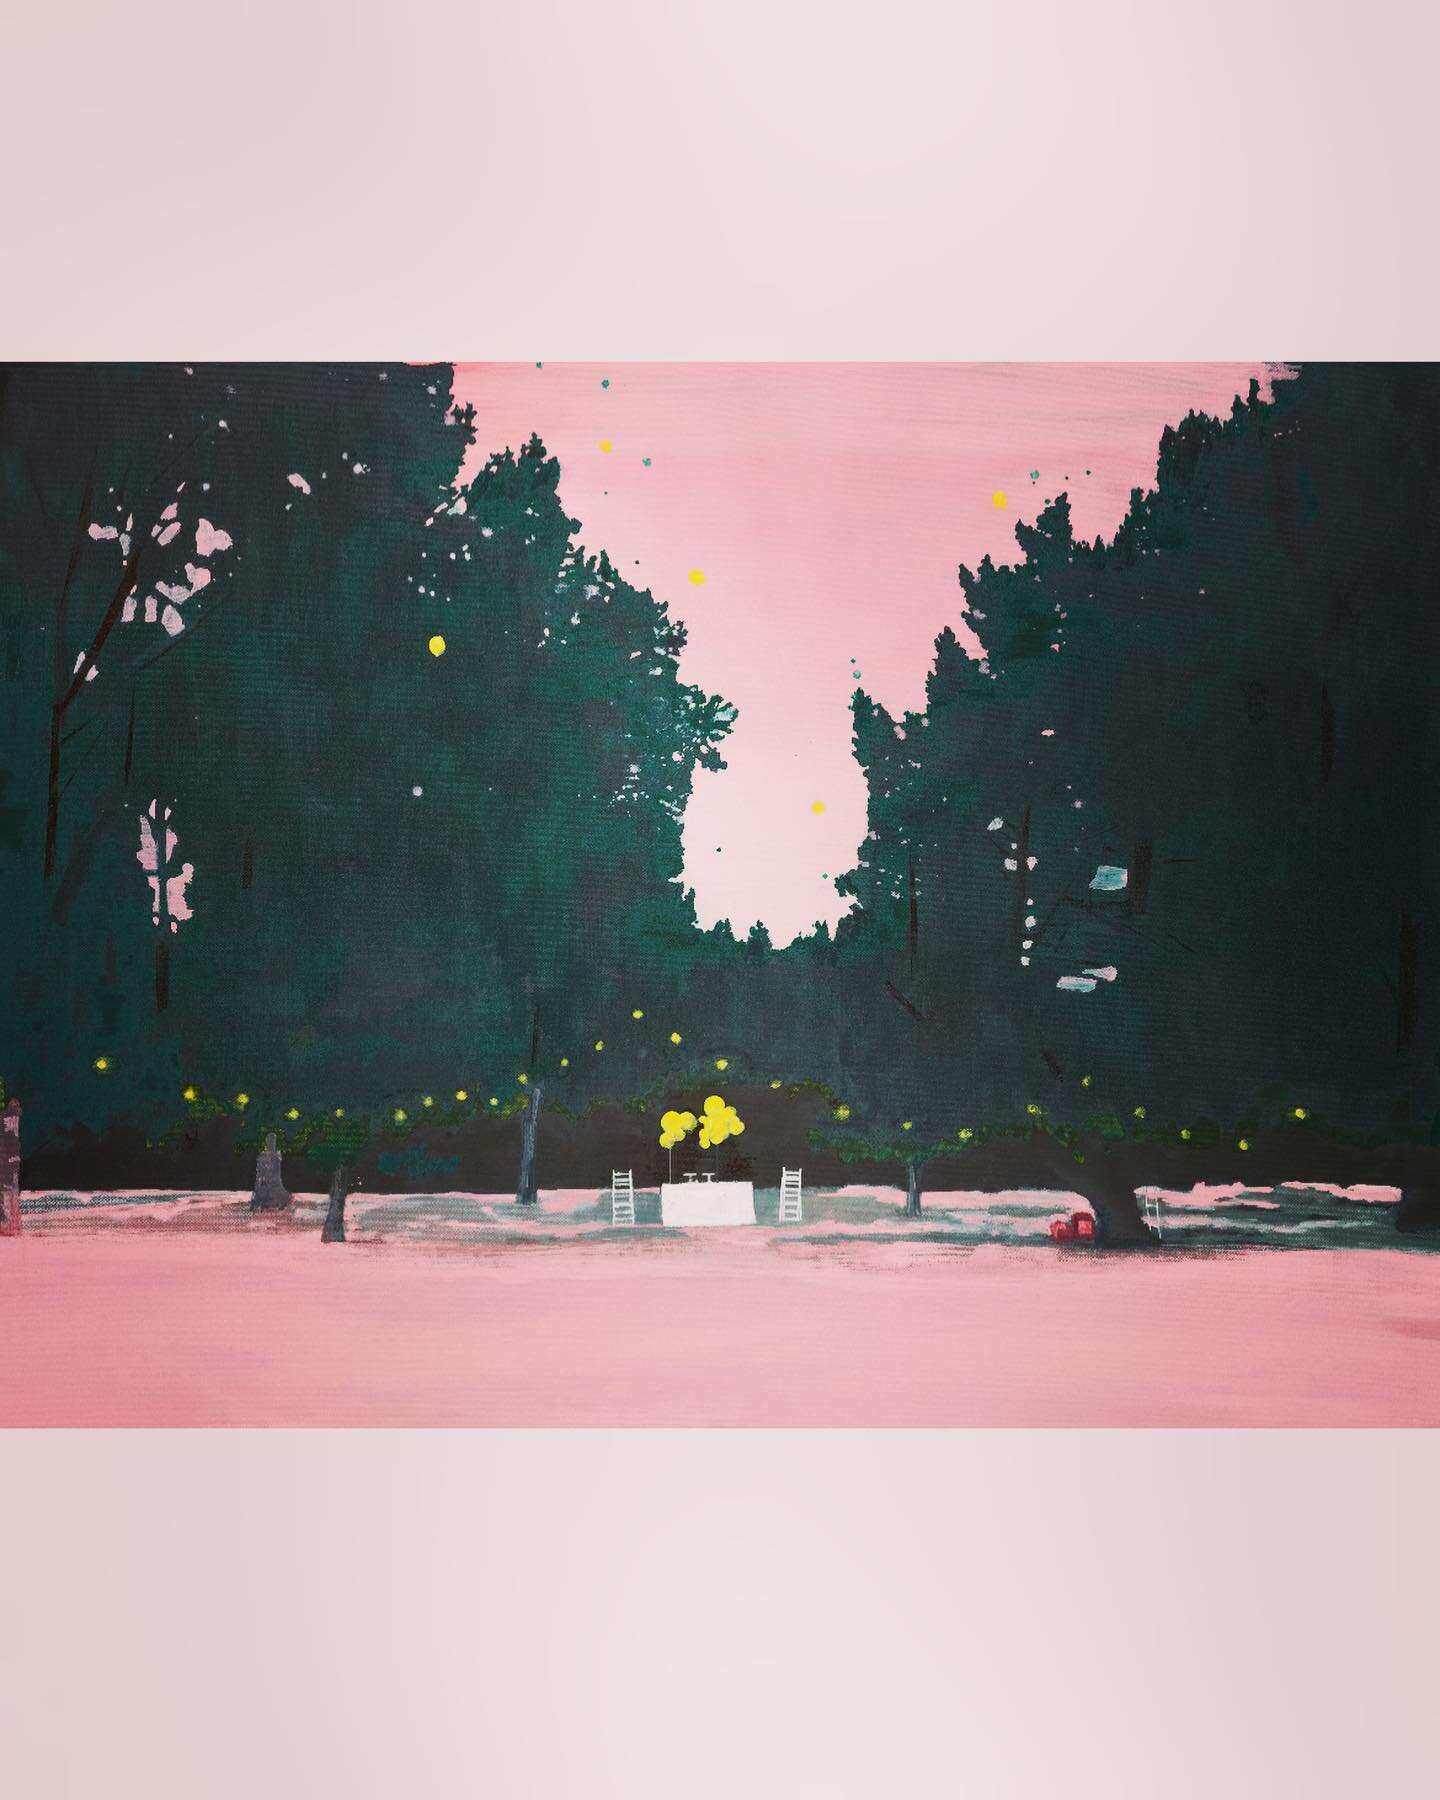 Just finished this reworking of a painting from last year called &lsquo;Late Summer Evening&rsquo;. Inspired by what looked like an abandoned party in Regents Park.  #contemporarypainting #summerevening #landscapepaintingnow #baloons #magical #twilig